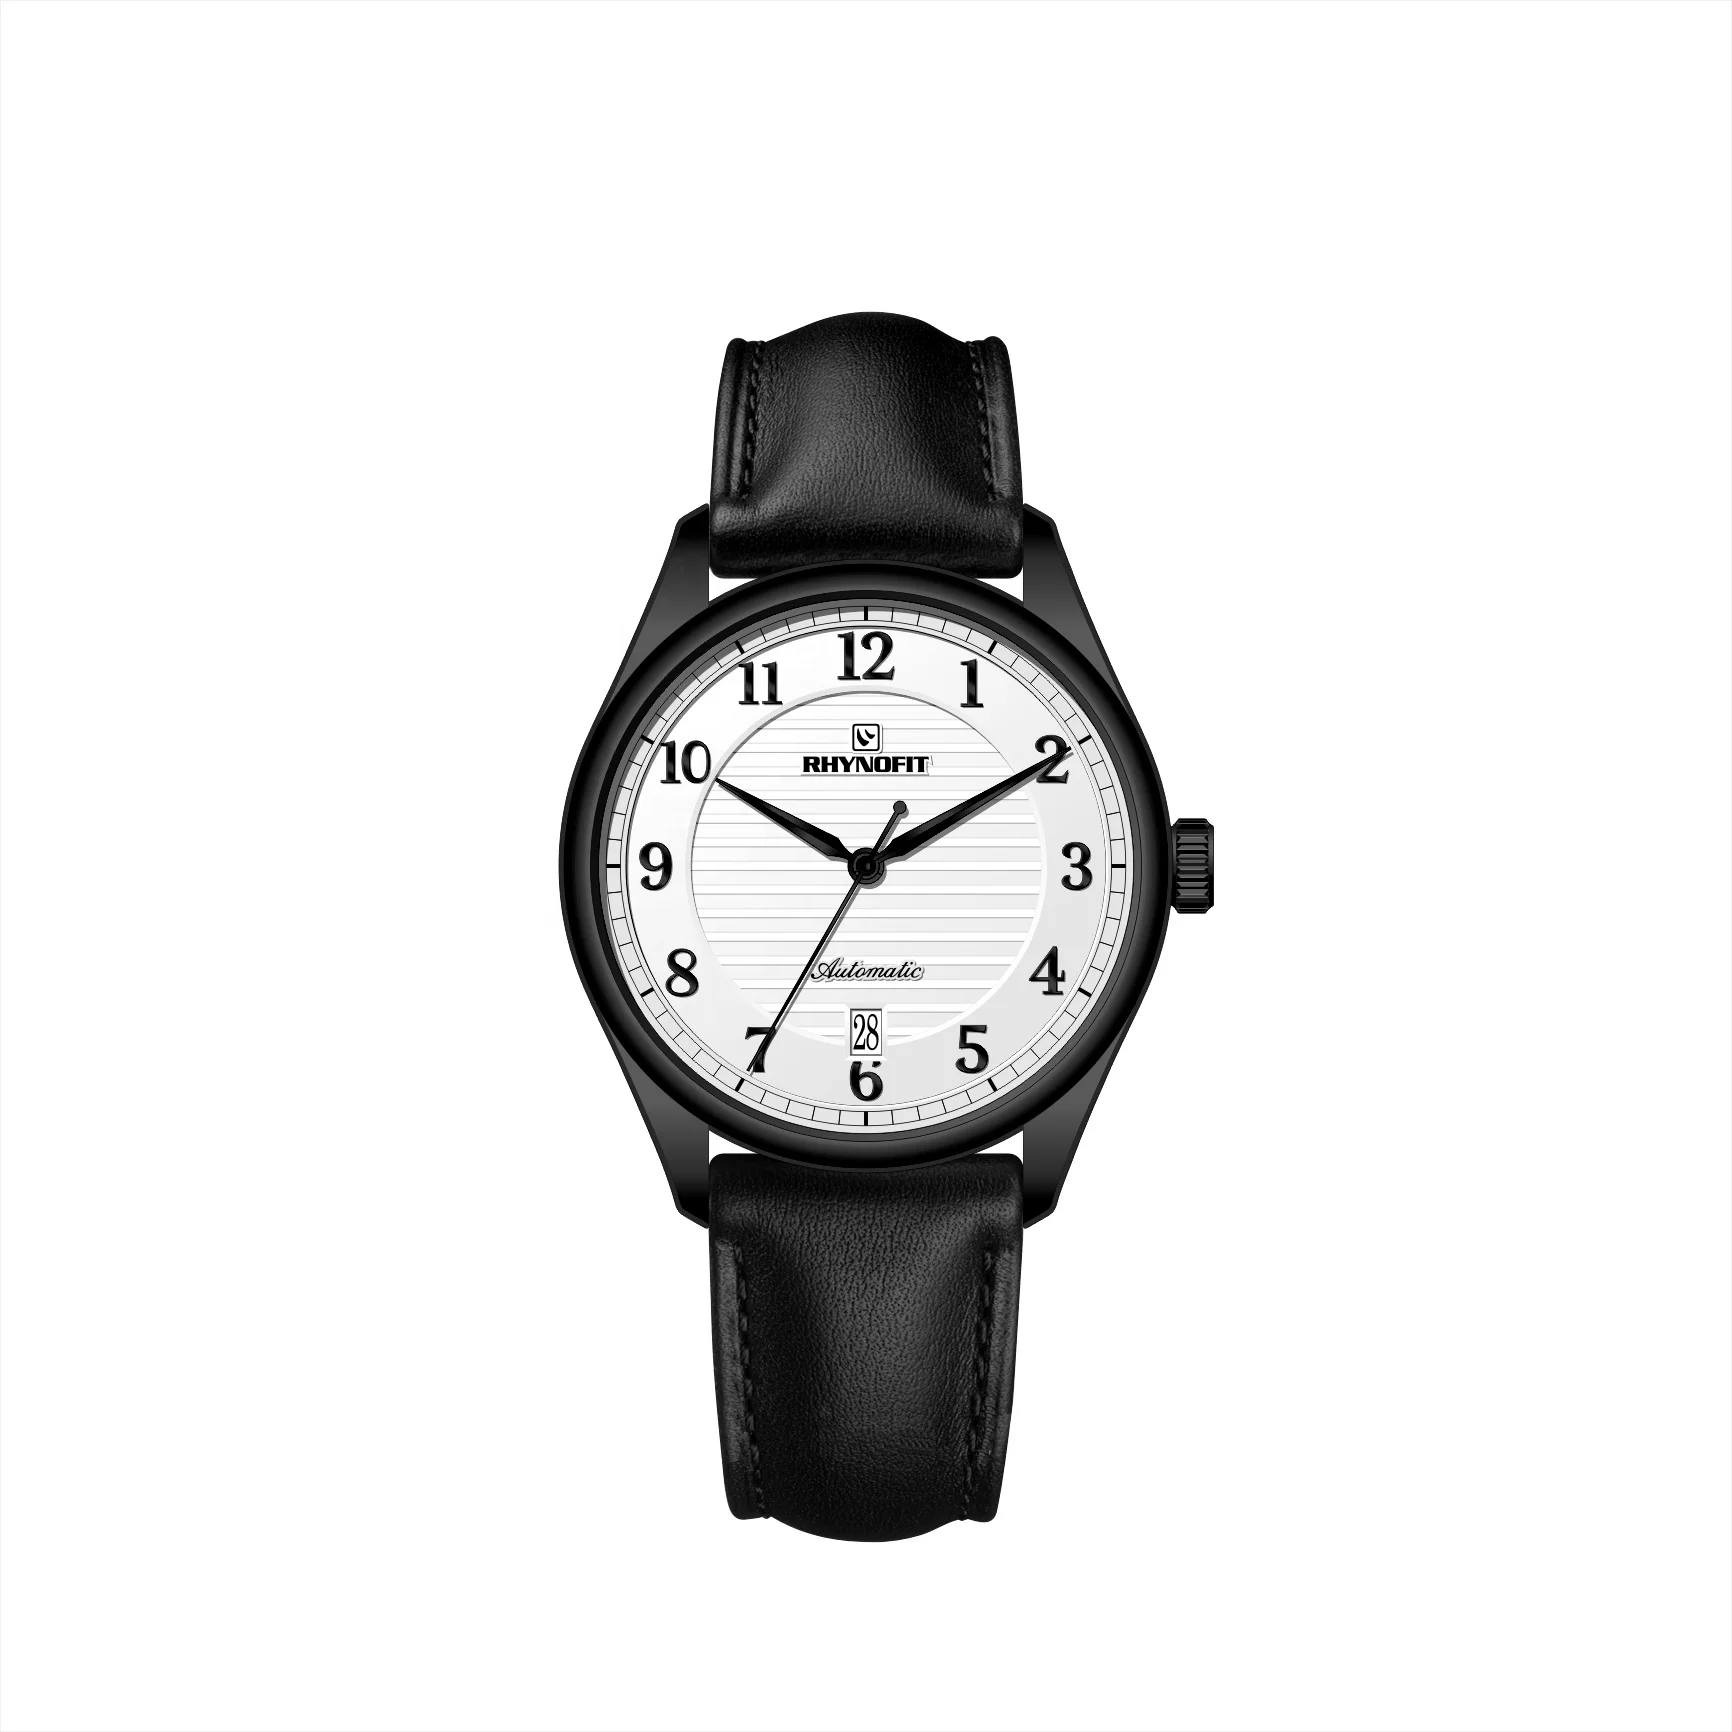 Top Brand Luxury Japanese Automatic NH35/NH36 Sapphire Coated Crystal Stainless Steel and Leather Dress Casual Watch for Sale